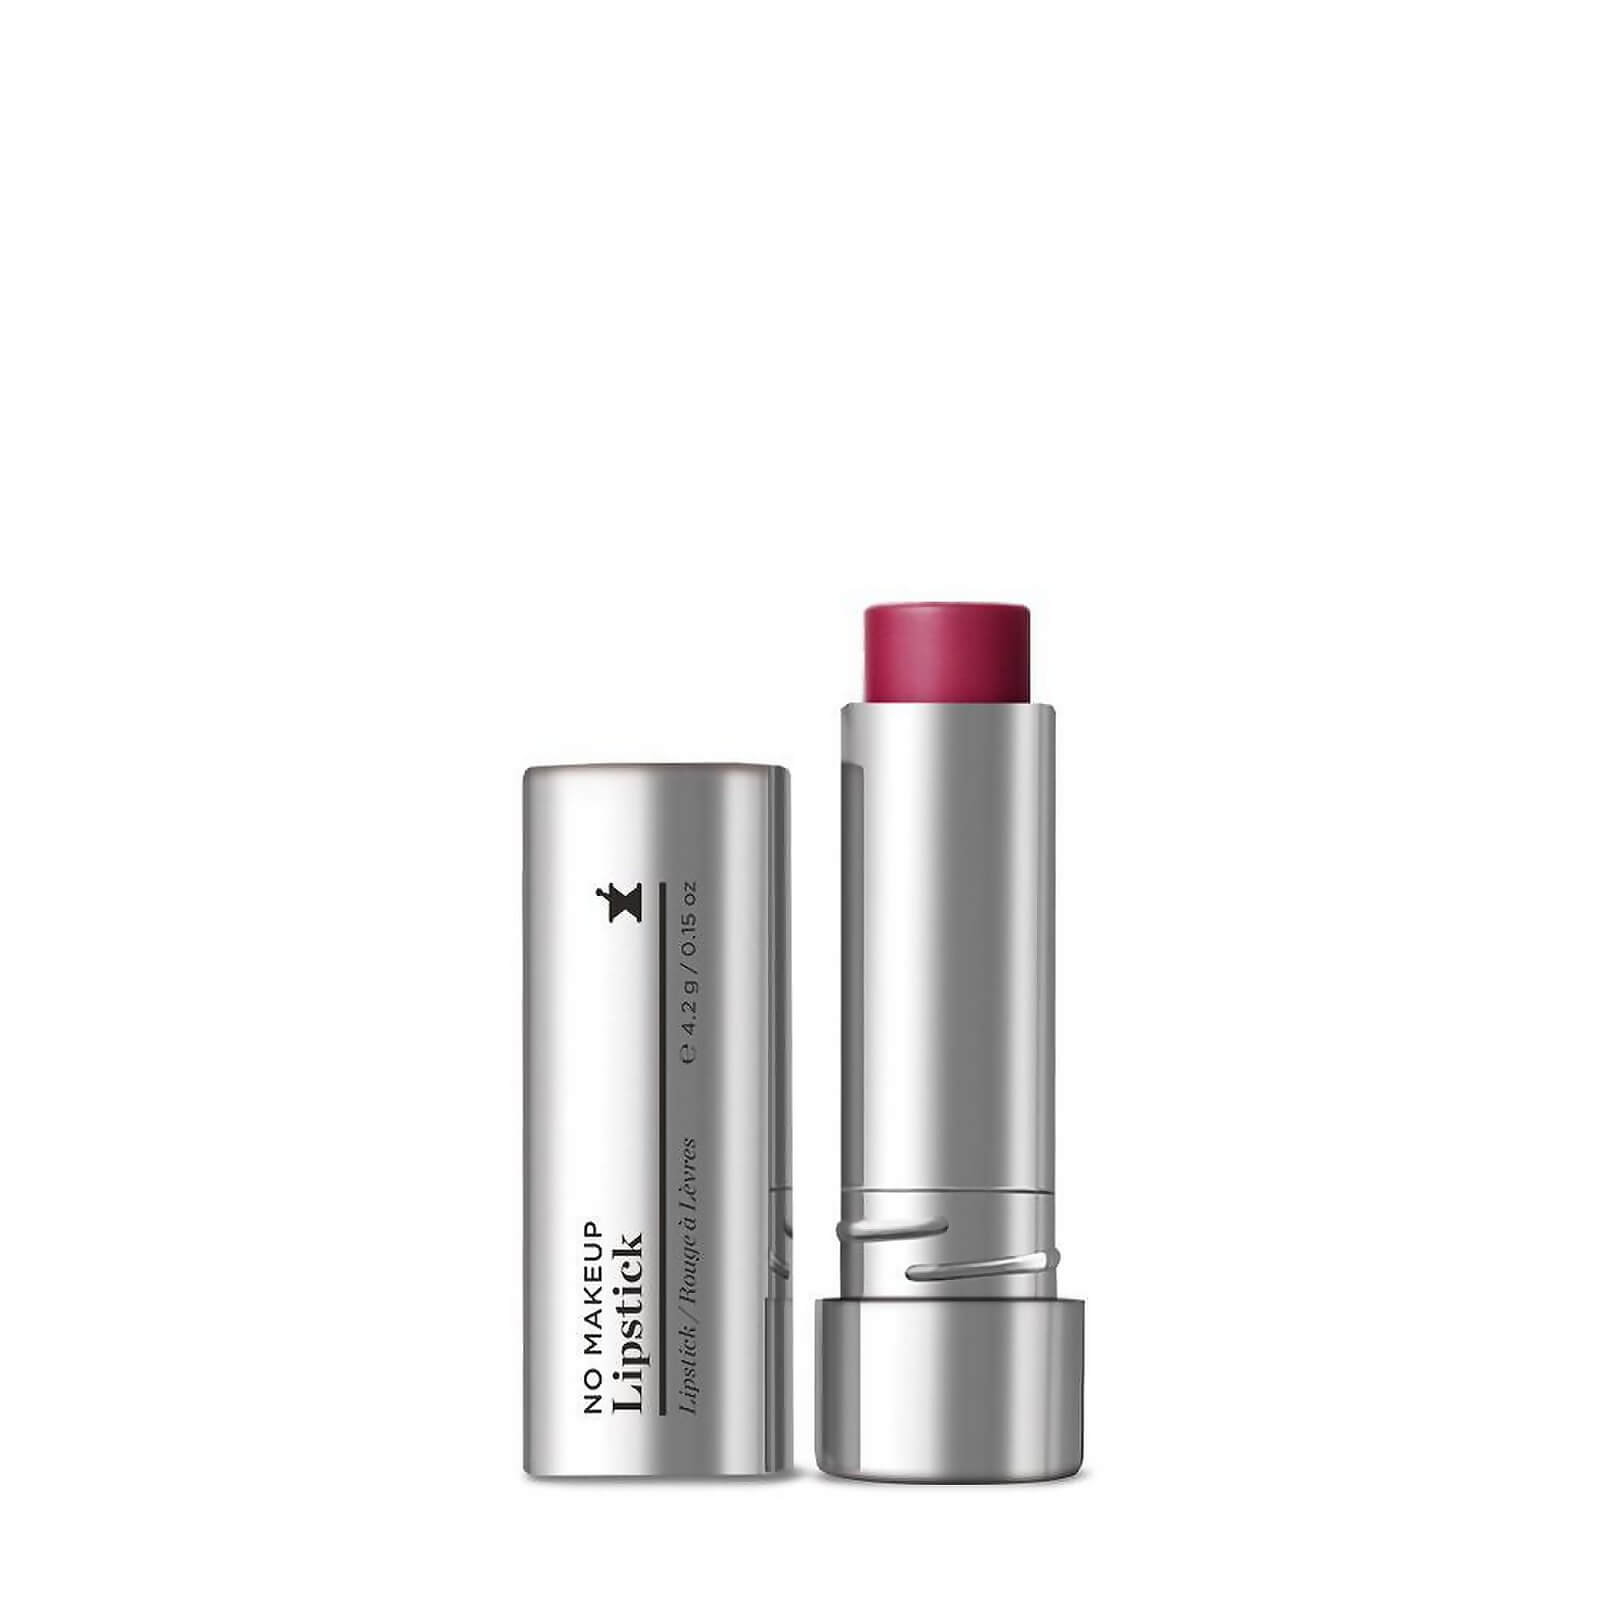 Perricone MD No Makeup Lipstick Broad Spectrum SPF15 4.2g (Various Shades) - 4 Red